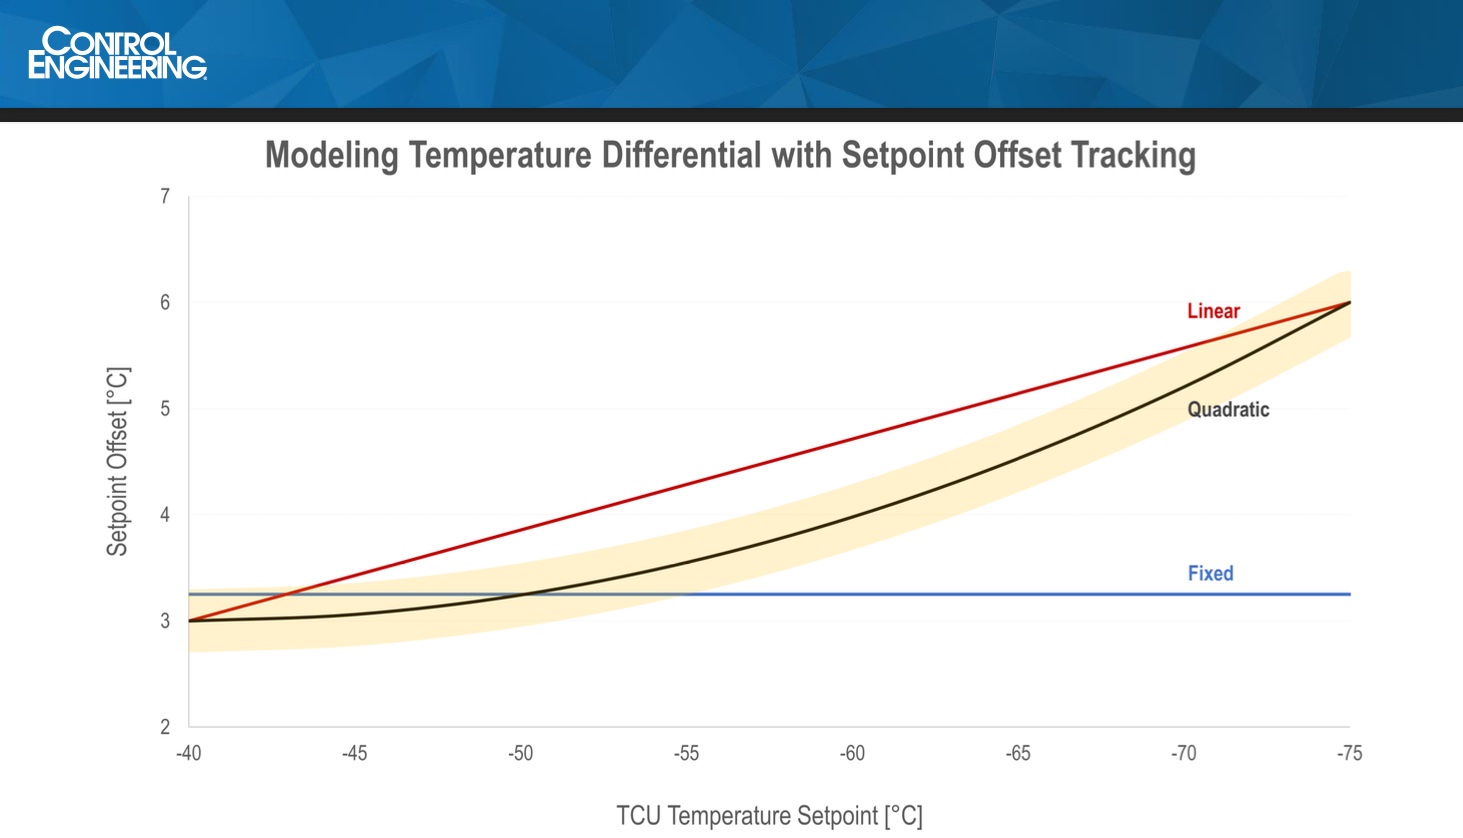 Figure 2: For the project, the quadratic model was the most successful in controlling temperature across the entire set point range. Courtesy: CFE Media and Technology, Applied Manufacturing Technologies, E Tech Group